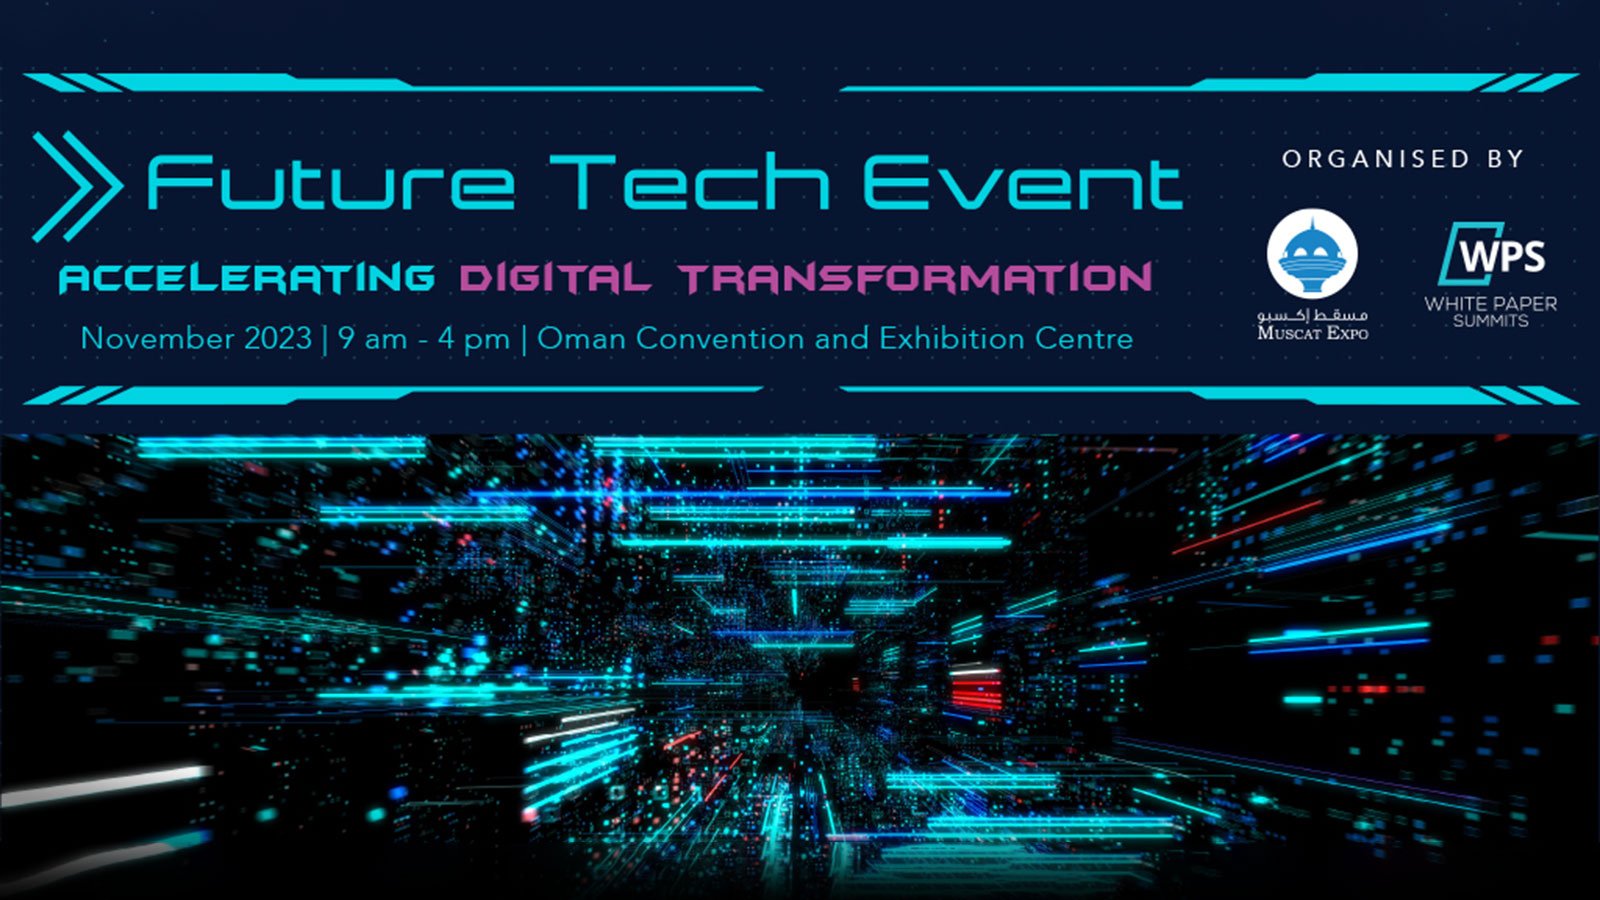 Future Tech Event to Take Place in November 2023